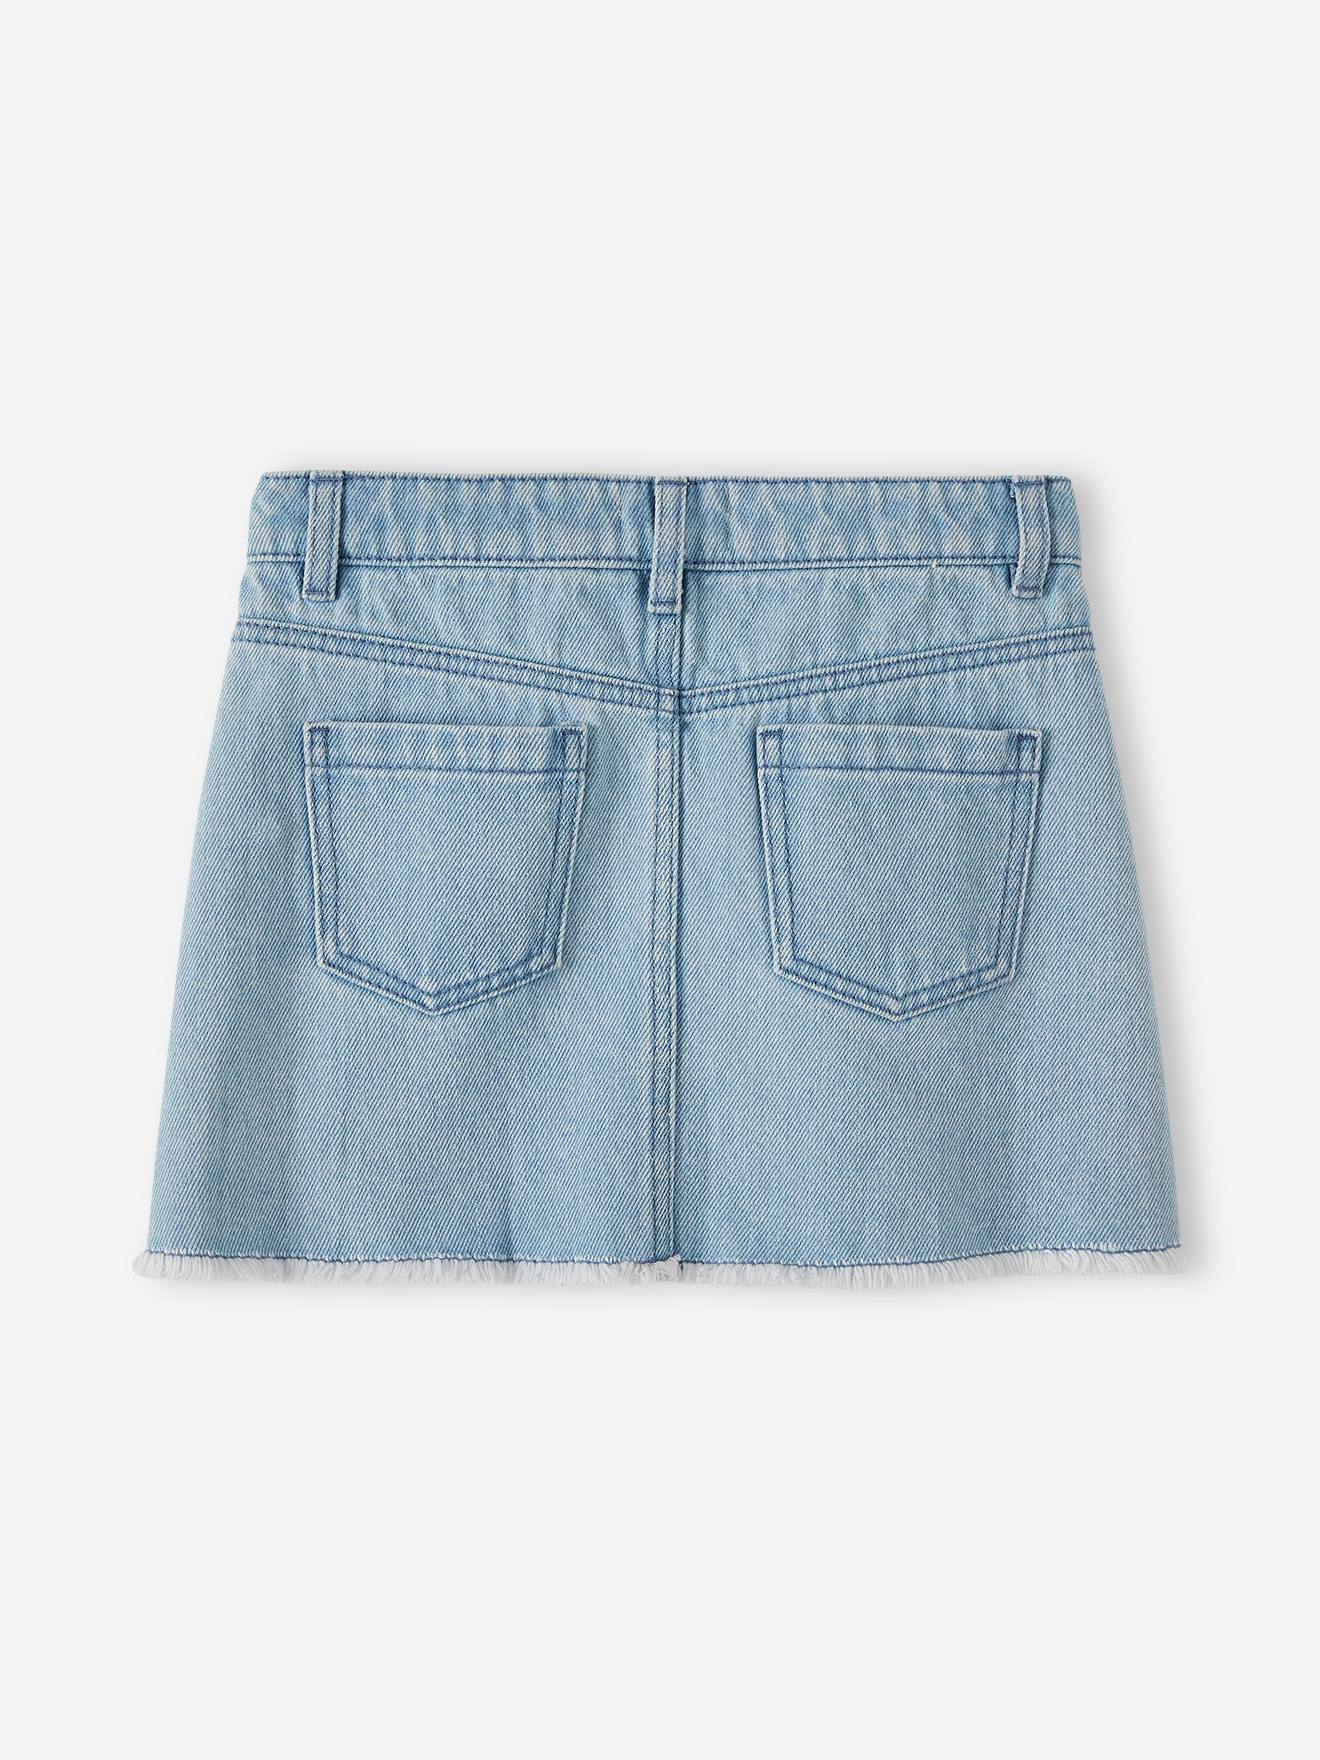 Denim Skirt with Embroidered Flowers, for Girls - bleached denim